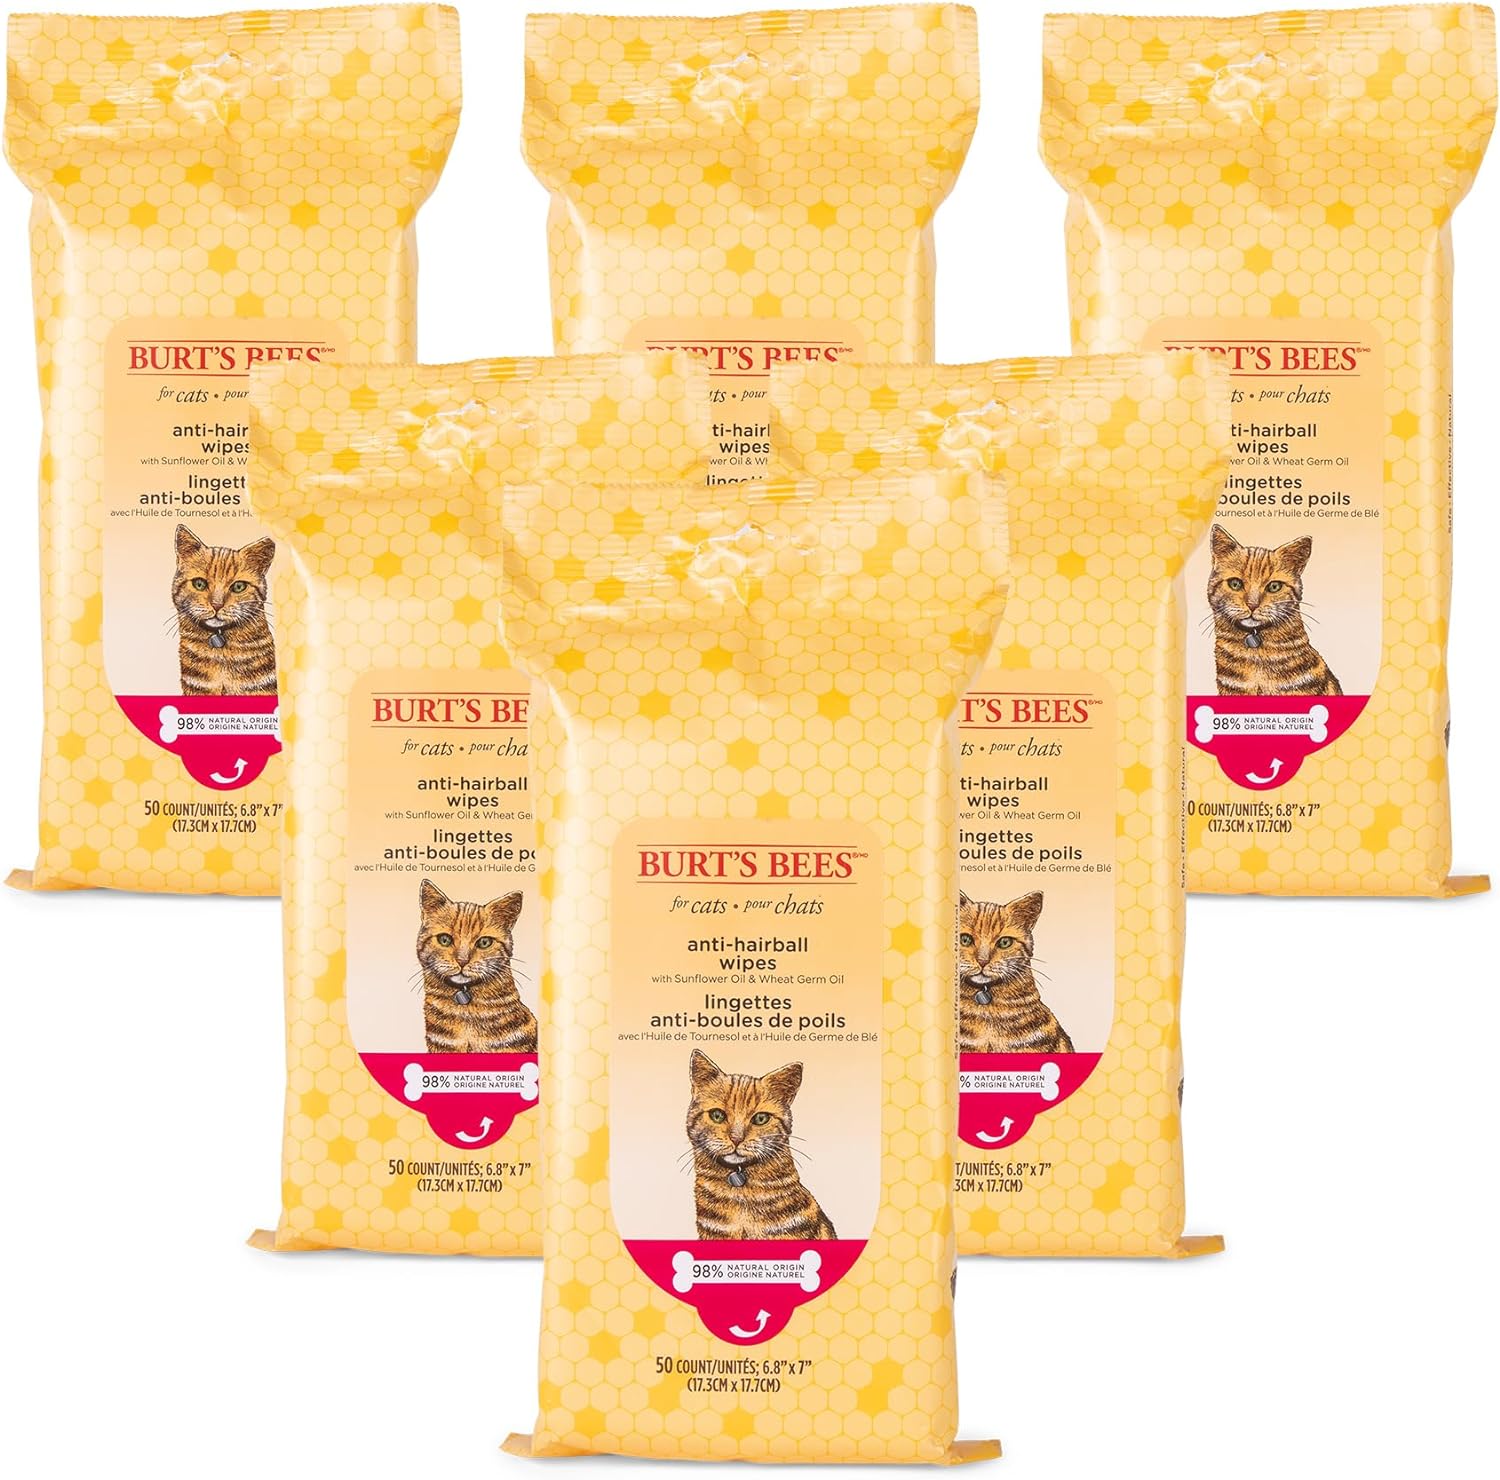 Burt's Bees for Pets Anti-Hairball Cat Wipes | Grooming Cat Wipes for Hairball Control | Cruelty Free, Sulfate & Paraben Free, pH Balanced for Cats - Made in The USA, 50 Ct - 6 Pack